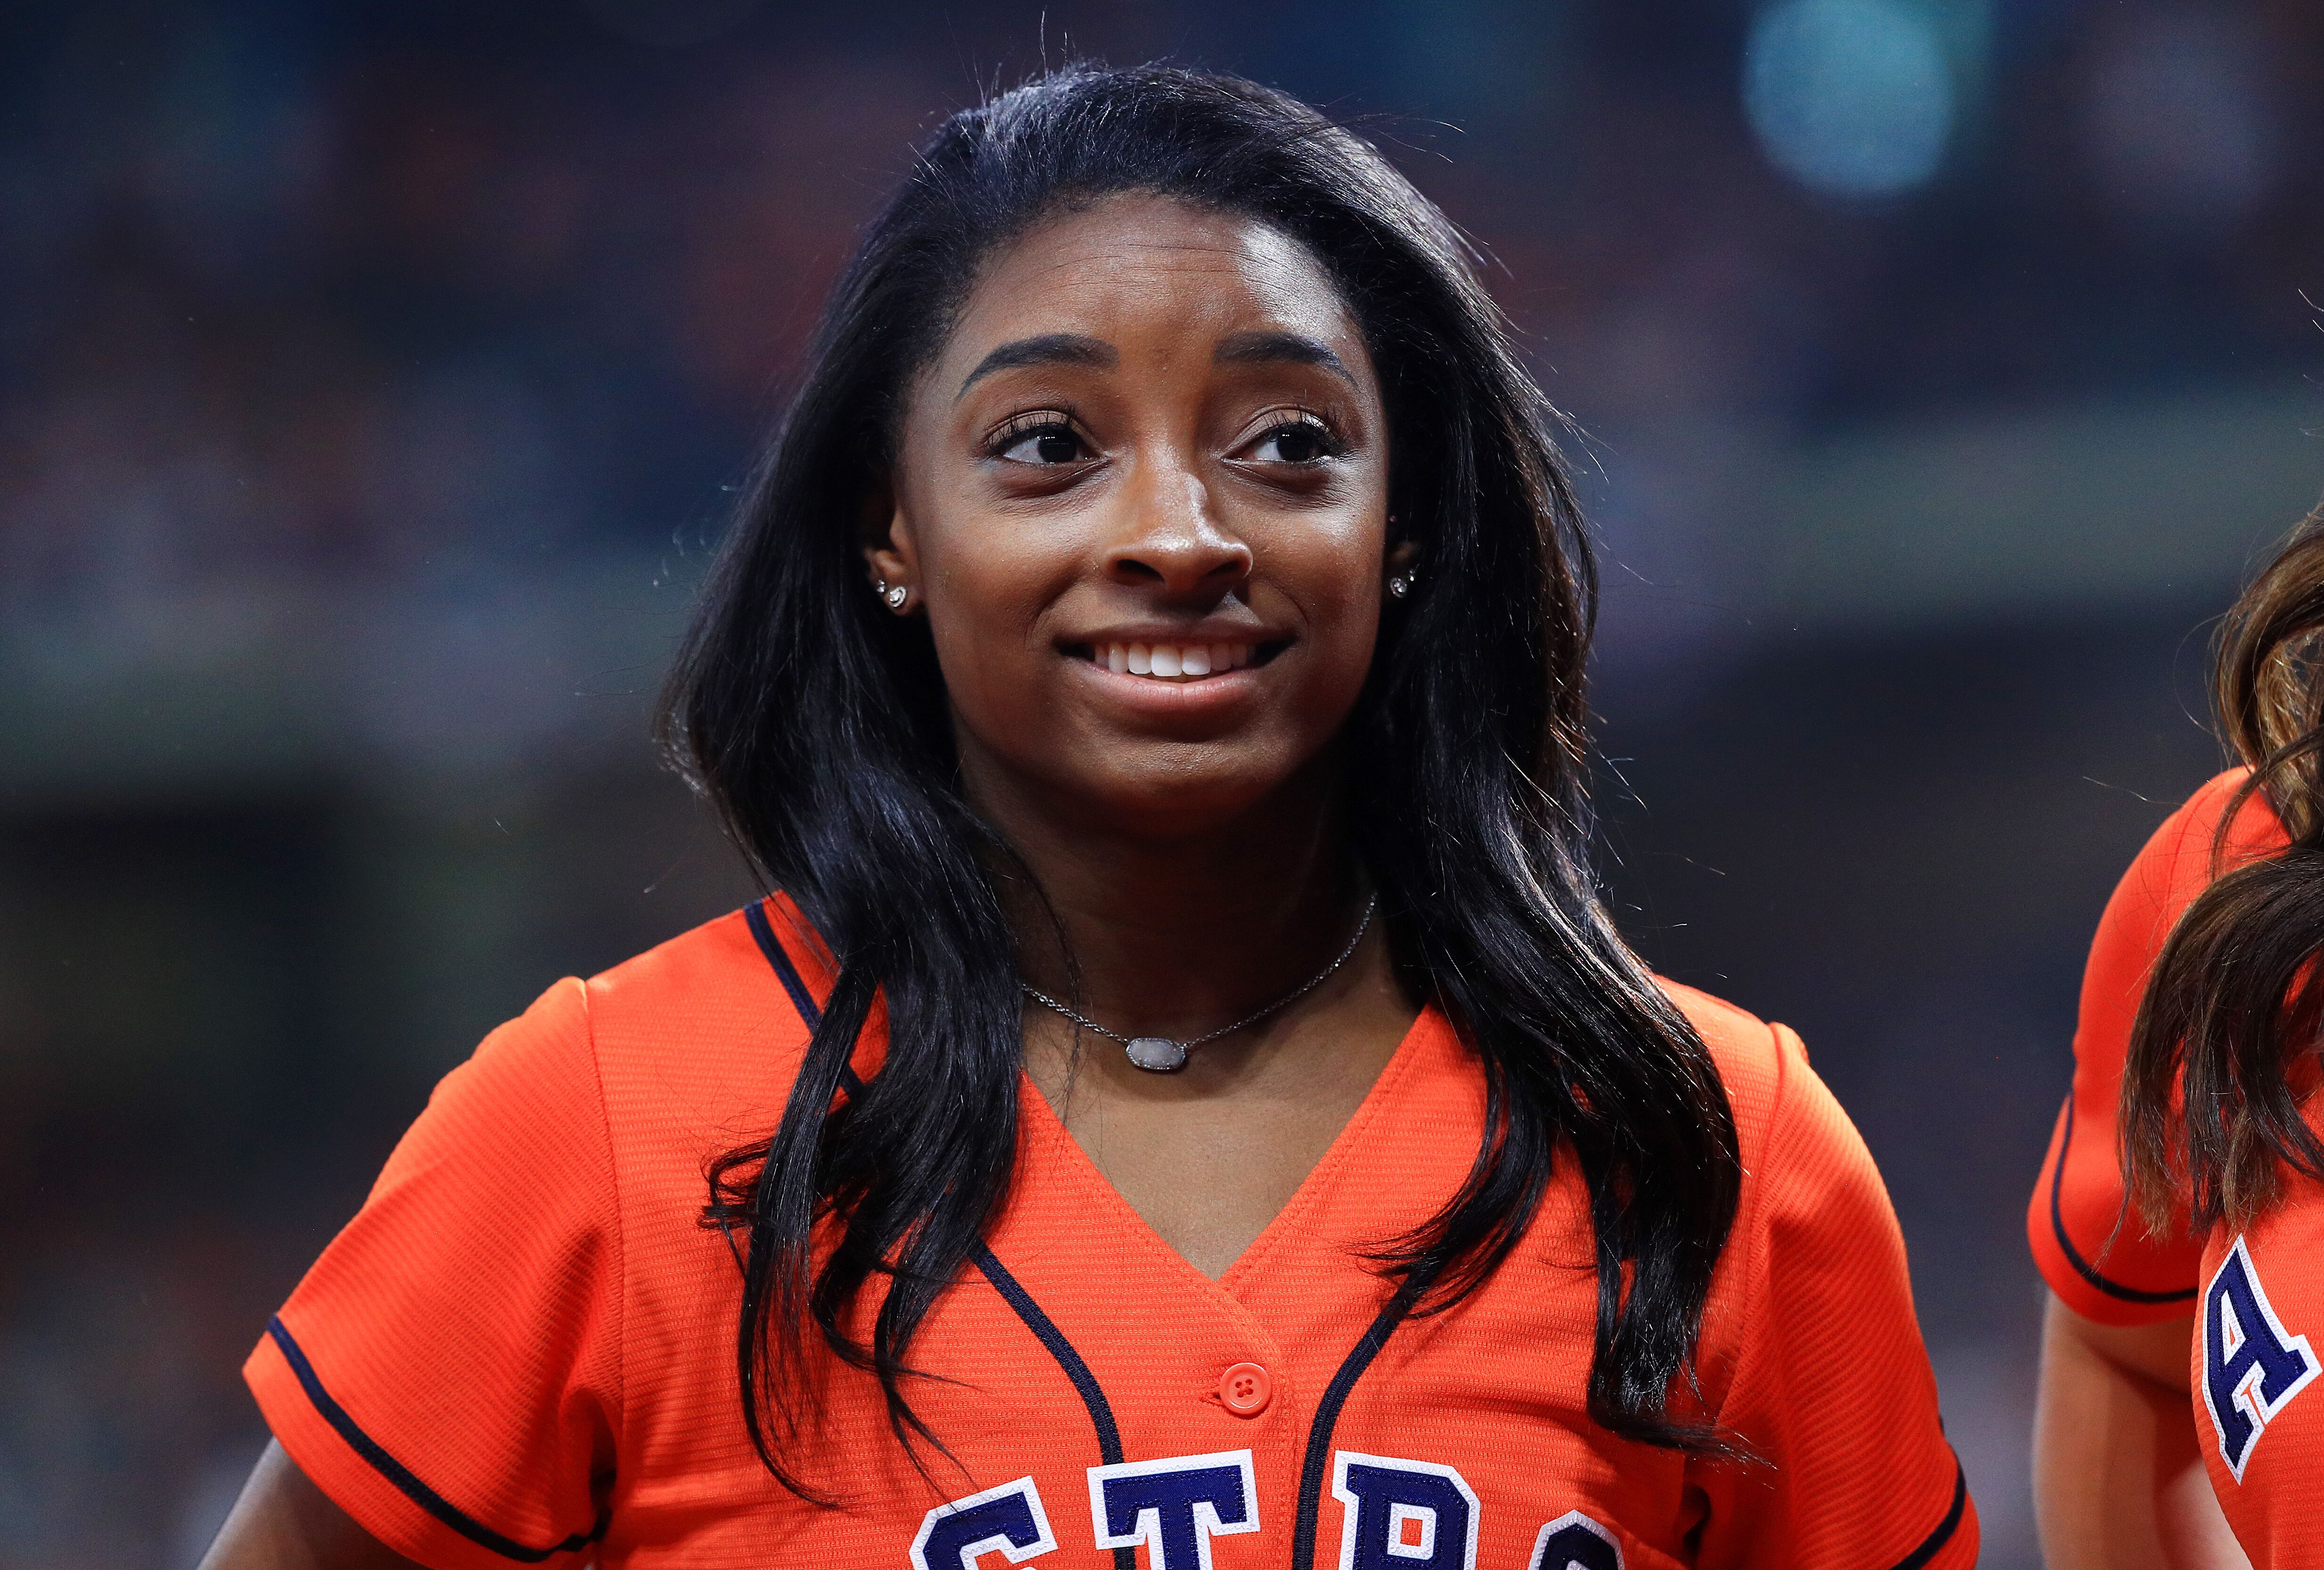 Simone Biles at Game Two of the 2019 World Series between the Houston Astros and the Washington Nationals on October 23, 2019. | Photo: Getty Images